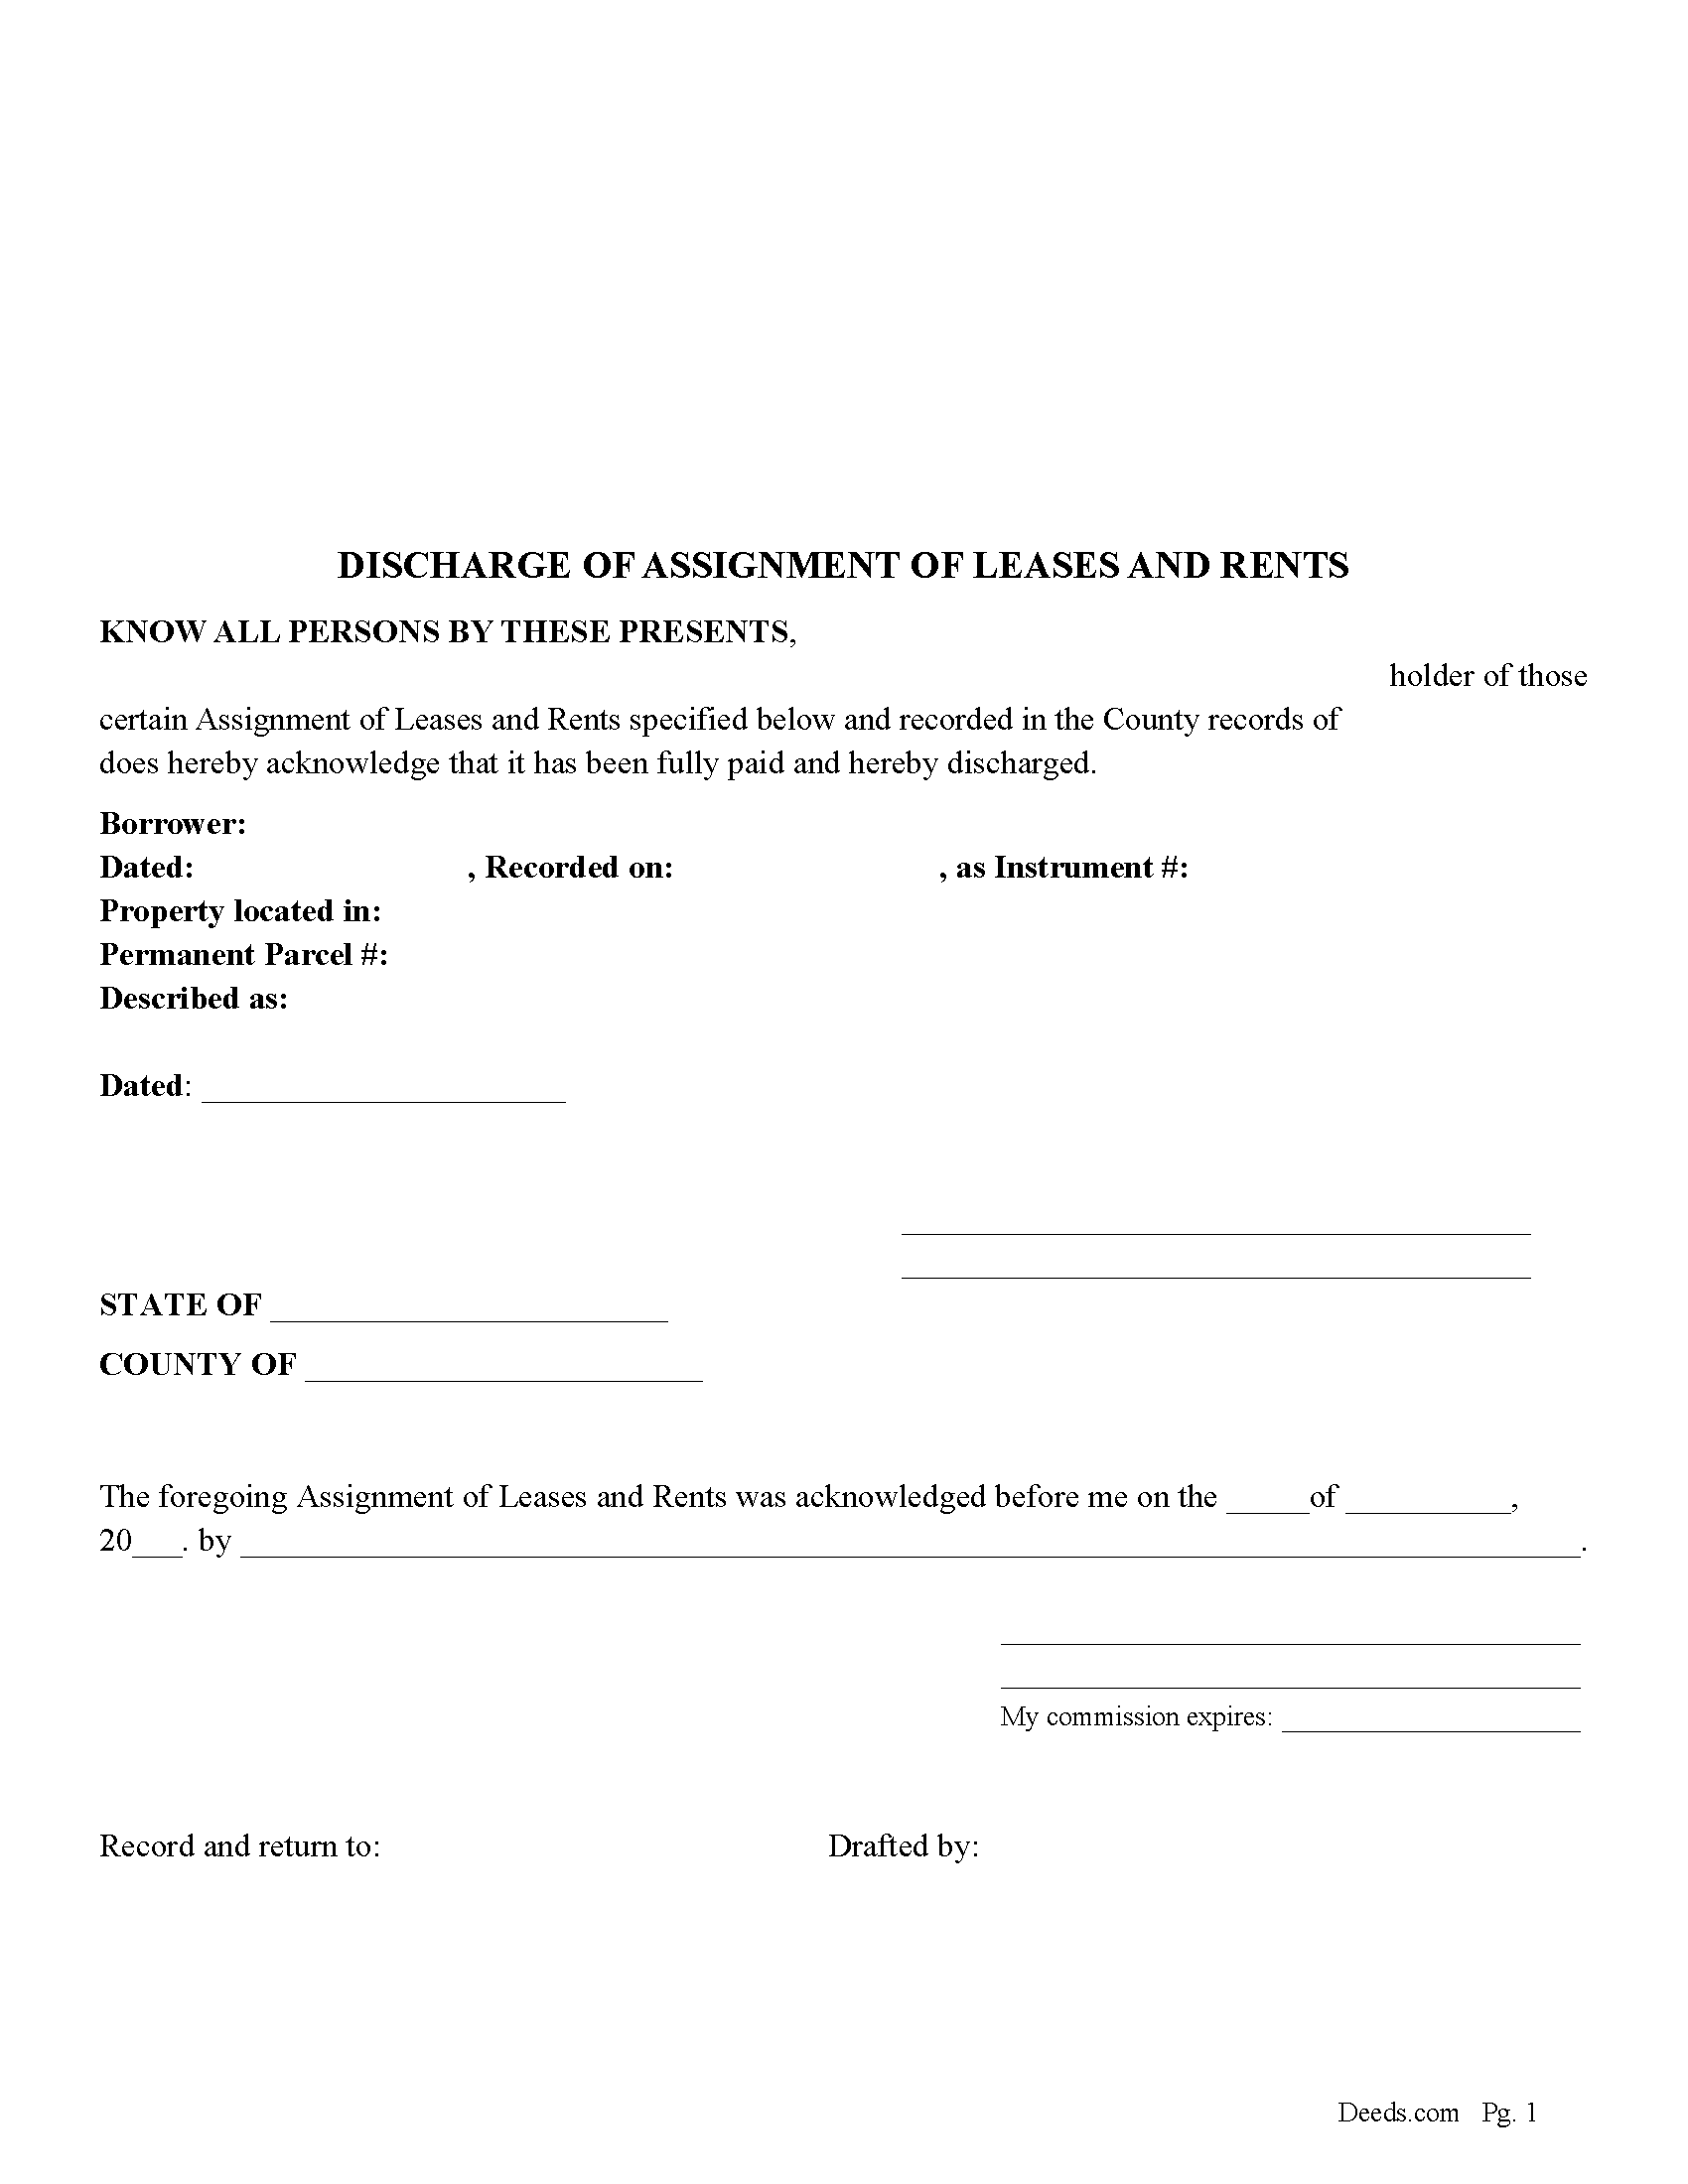 Discharge of Assignment of Leases and Rents